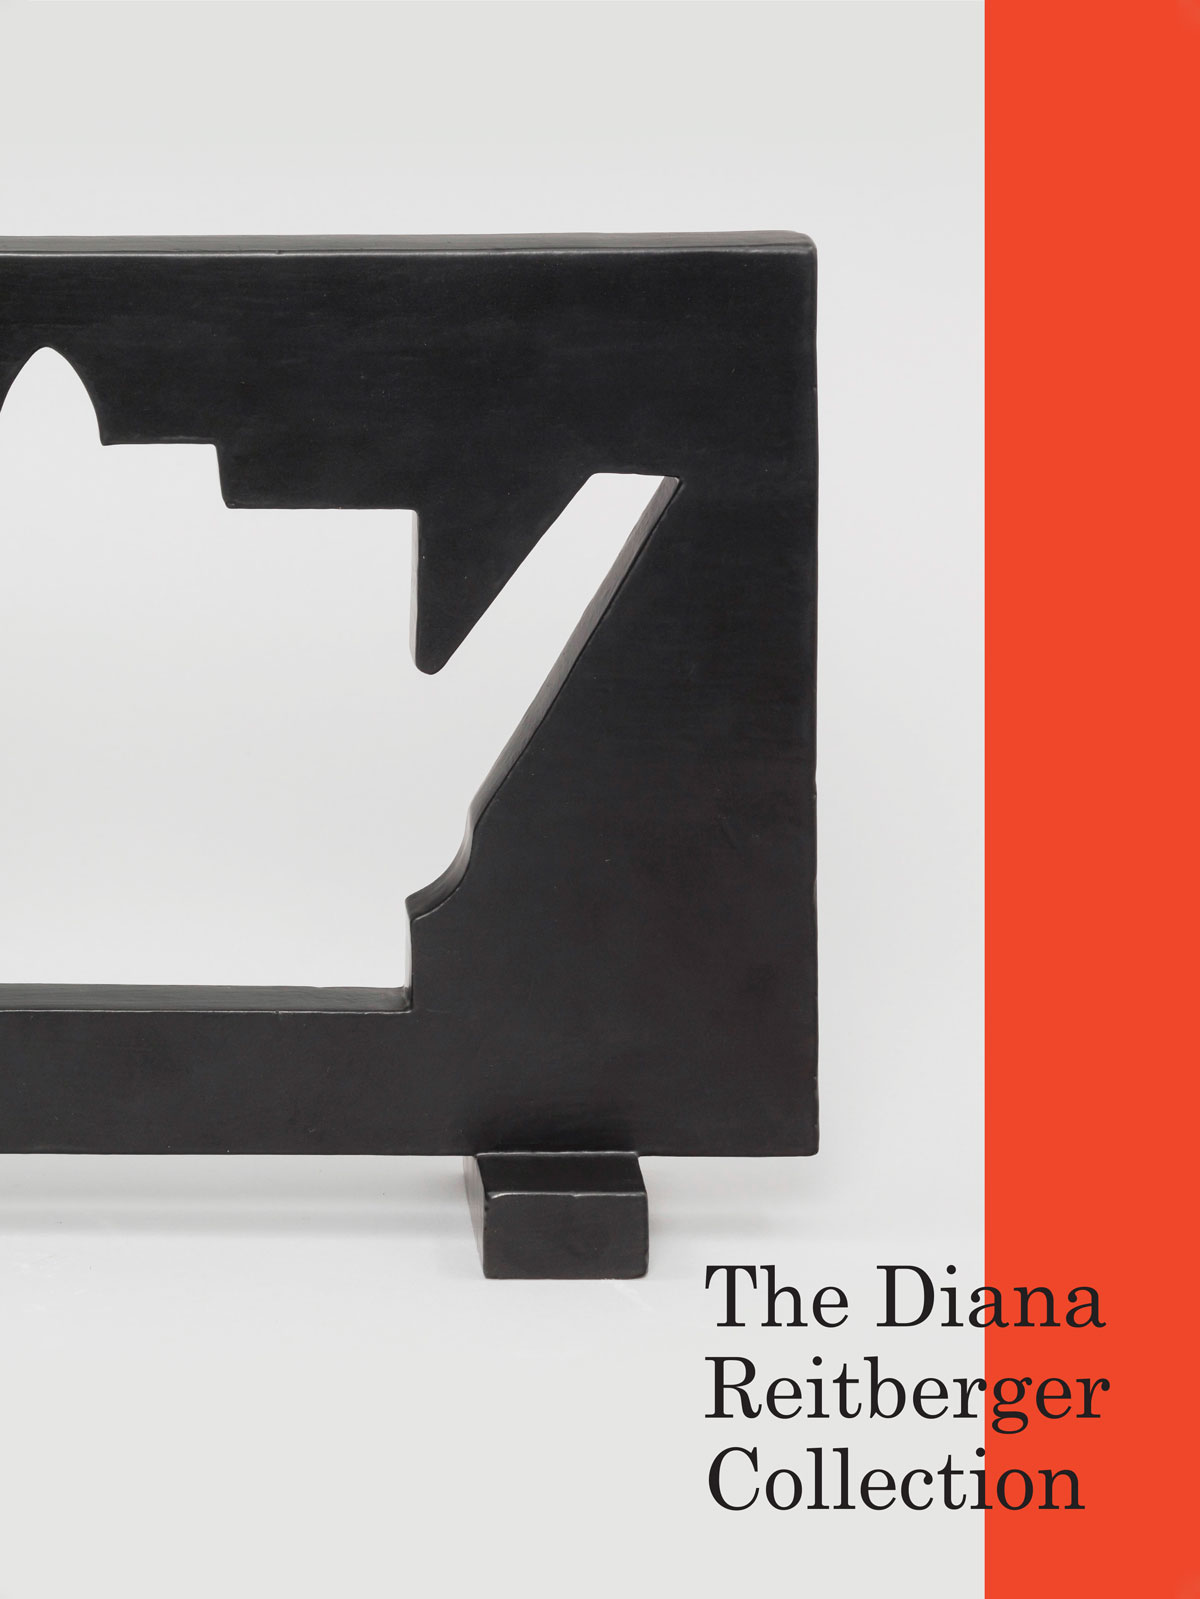 Collection Catalogue: The Diana Reitberger Collection Product Image 3 of 3